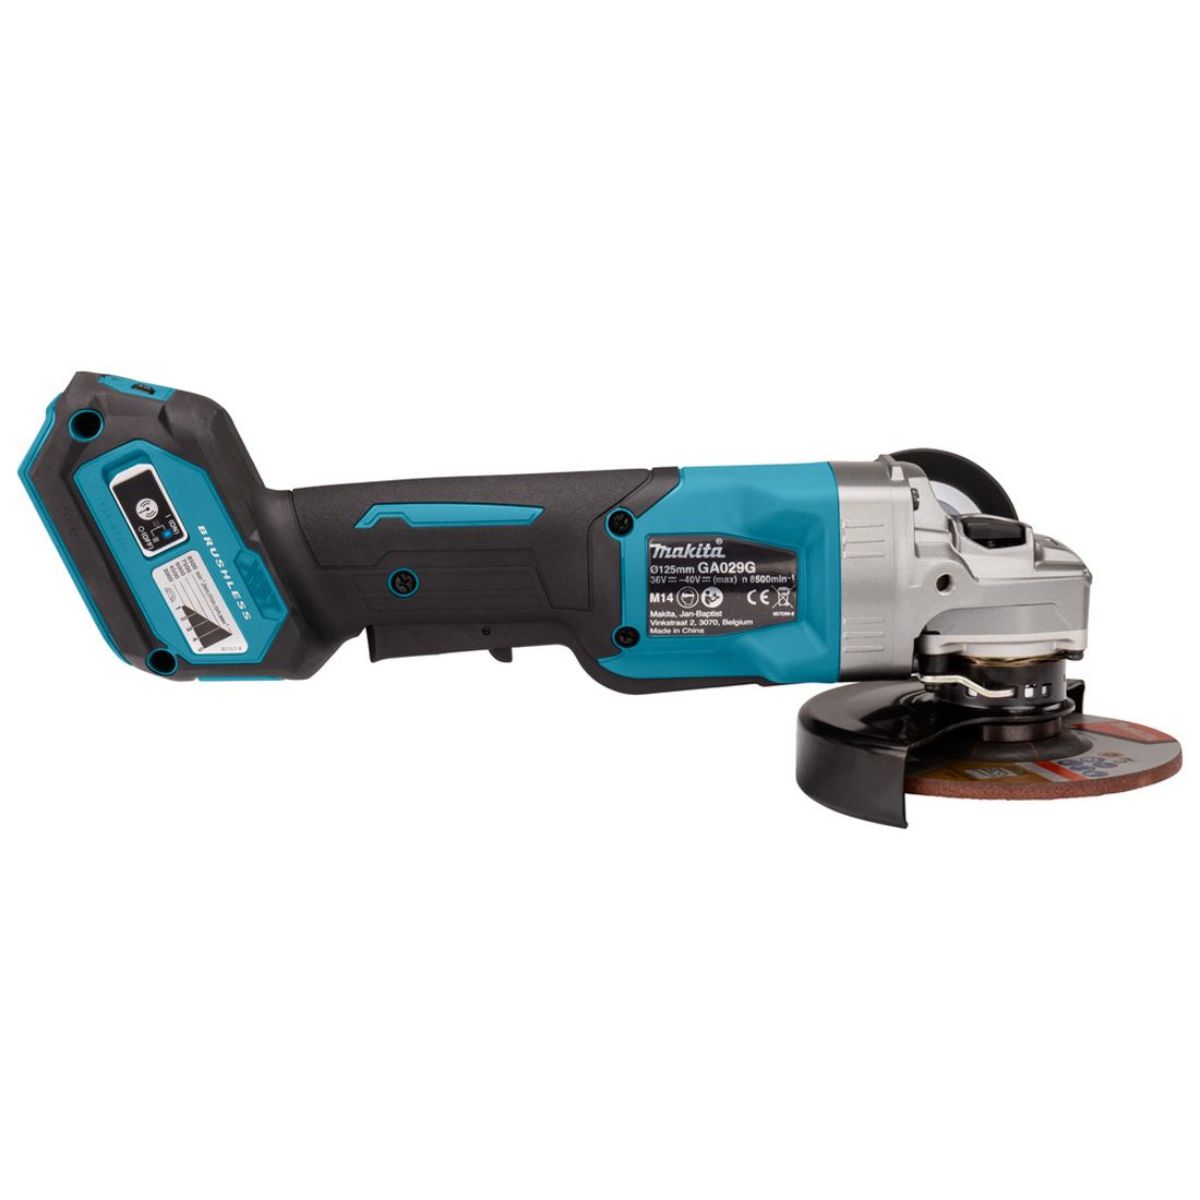 Makita GA029GZ01 40v XGT Max 125mm Brushless Angle Grinder Body Only With Carry Case